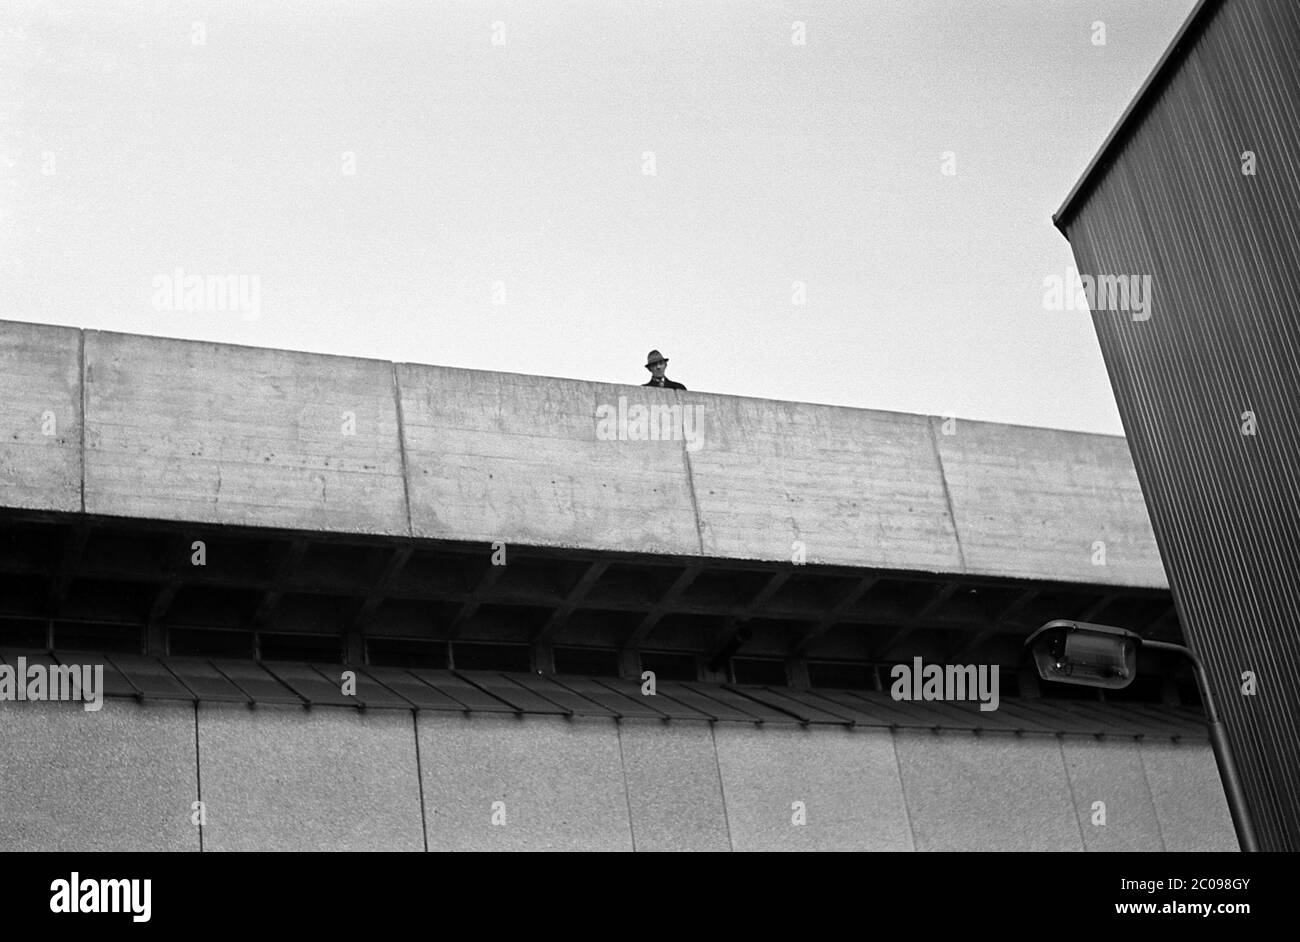 AJAXNETPHOTO. 10TH MARCH, 1968. PORTSMOUTH, ENGLAND. - 2ND UGLIEST - MAN LOOKS OUT OVER PARAPIT OF TRICORN COMPLEX NEAR COMMERCIAL ROAD. CONCRETE BUILDING ONCE VOTED 2ND UGLIEST IN BRITAIN. NOW (2020) DEMOLISHED.PHOTO:JONATHAN EASTLAND/AJAX REF:3568138 3 96 Stock Photo